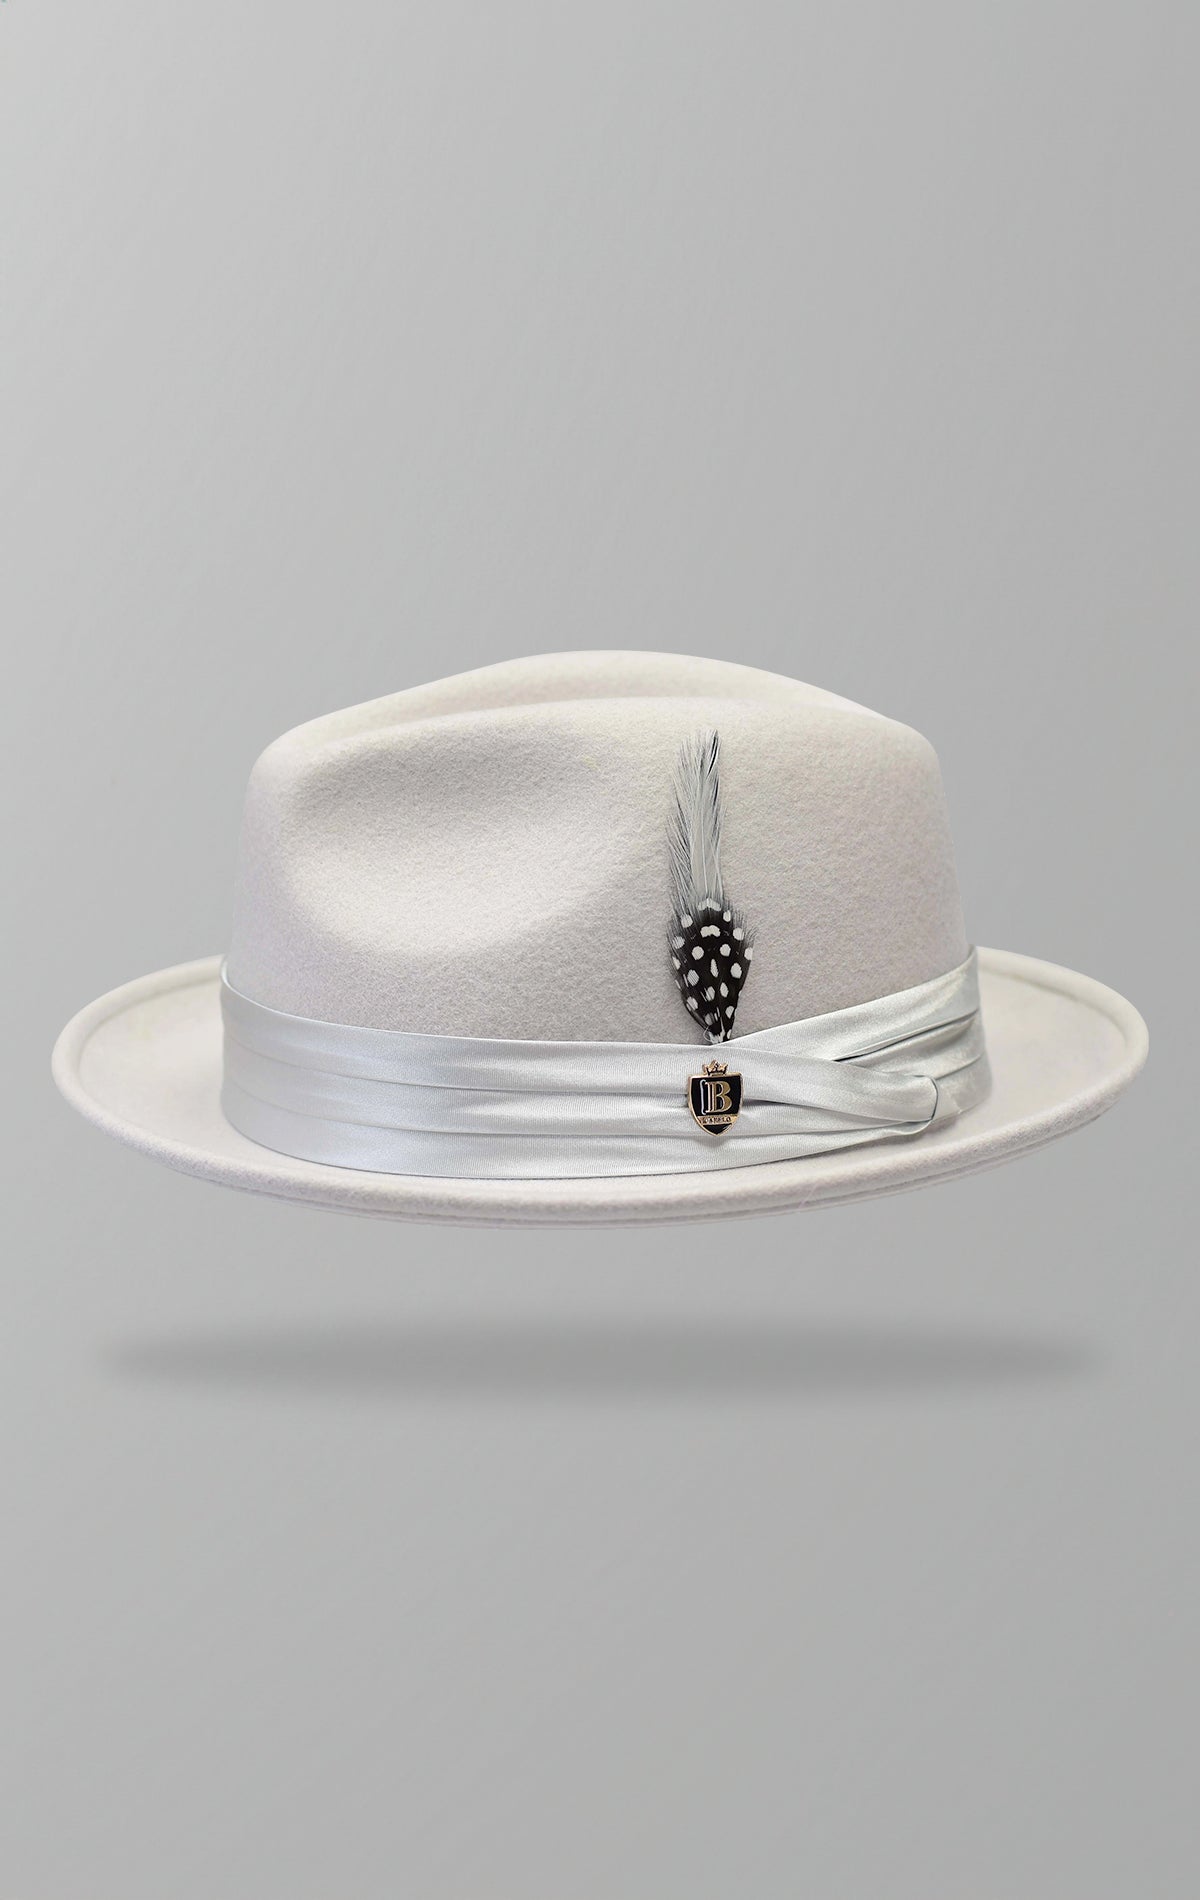 Classic wool fedora crafted from 100% fine Australian wool with a 2.25-inch brim, satin hat band, and removable logo pin.